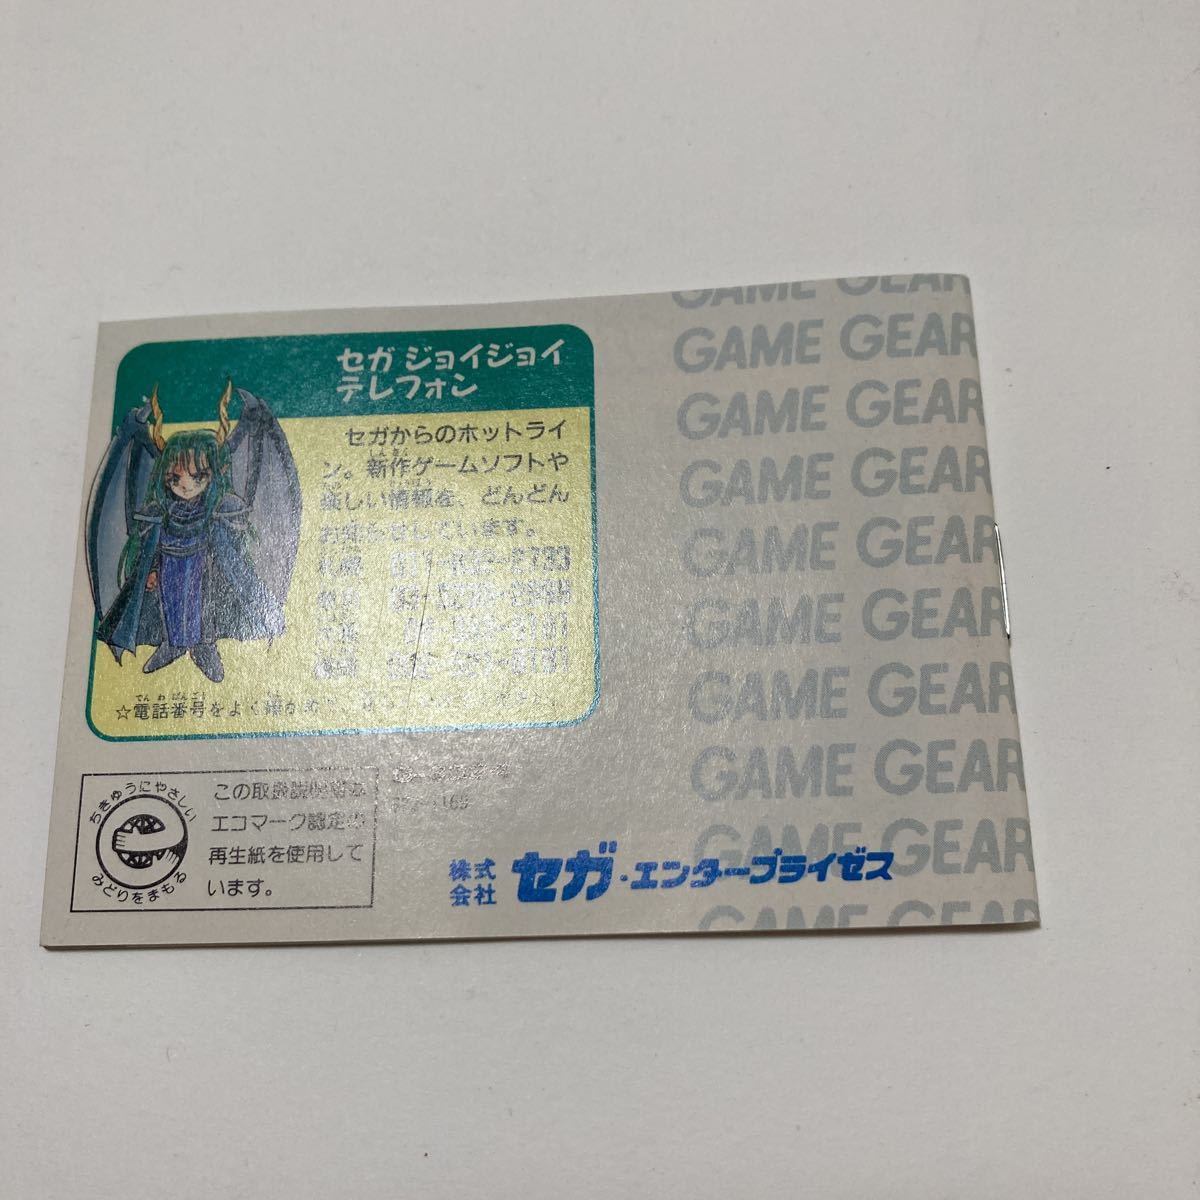  free shipping SEGA Game Gear soft .... operation not yet verification Junk box * manual equipped 